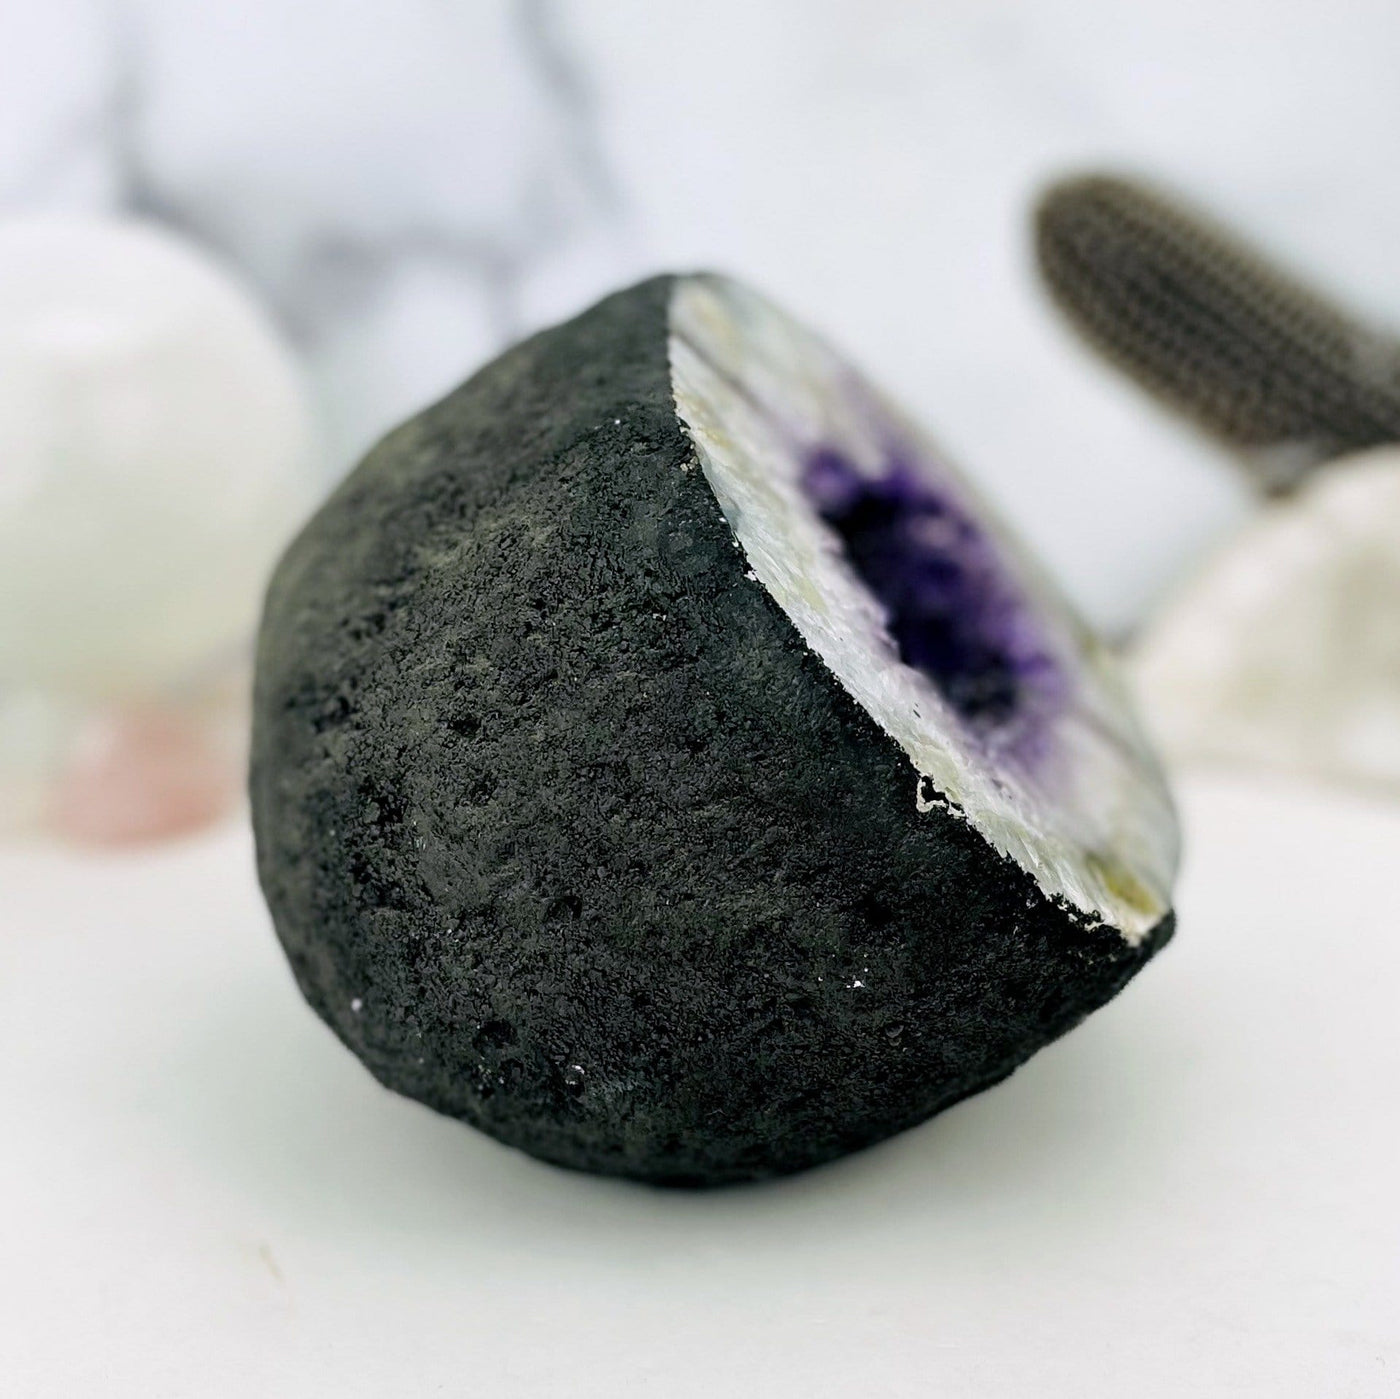 Side view of the amethyst geode showing the black along the back and edges.